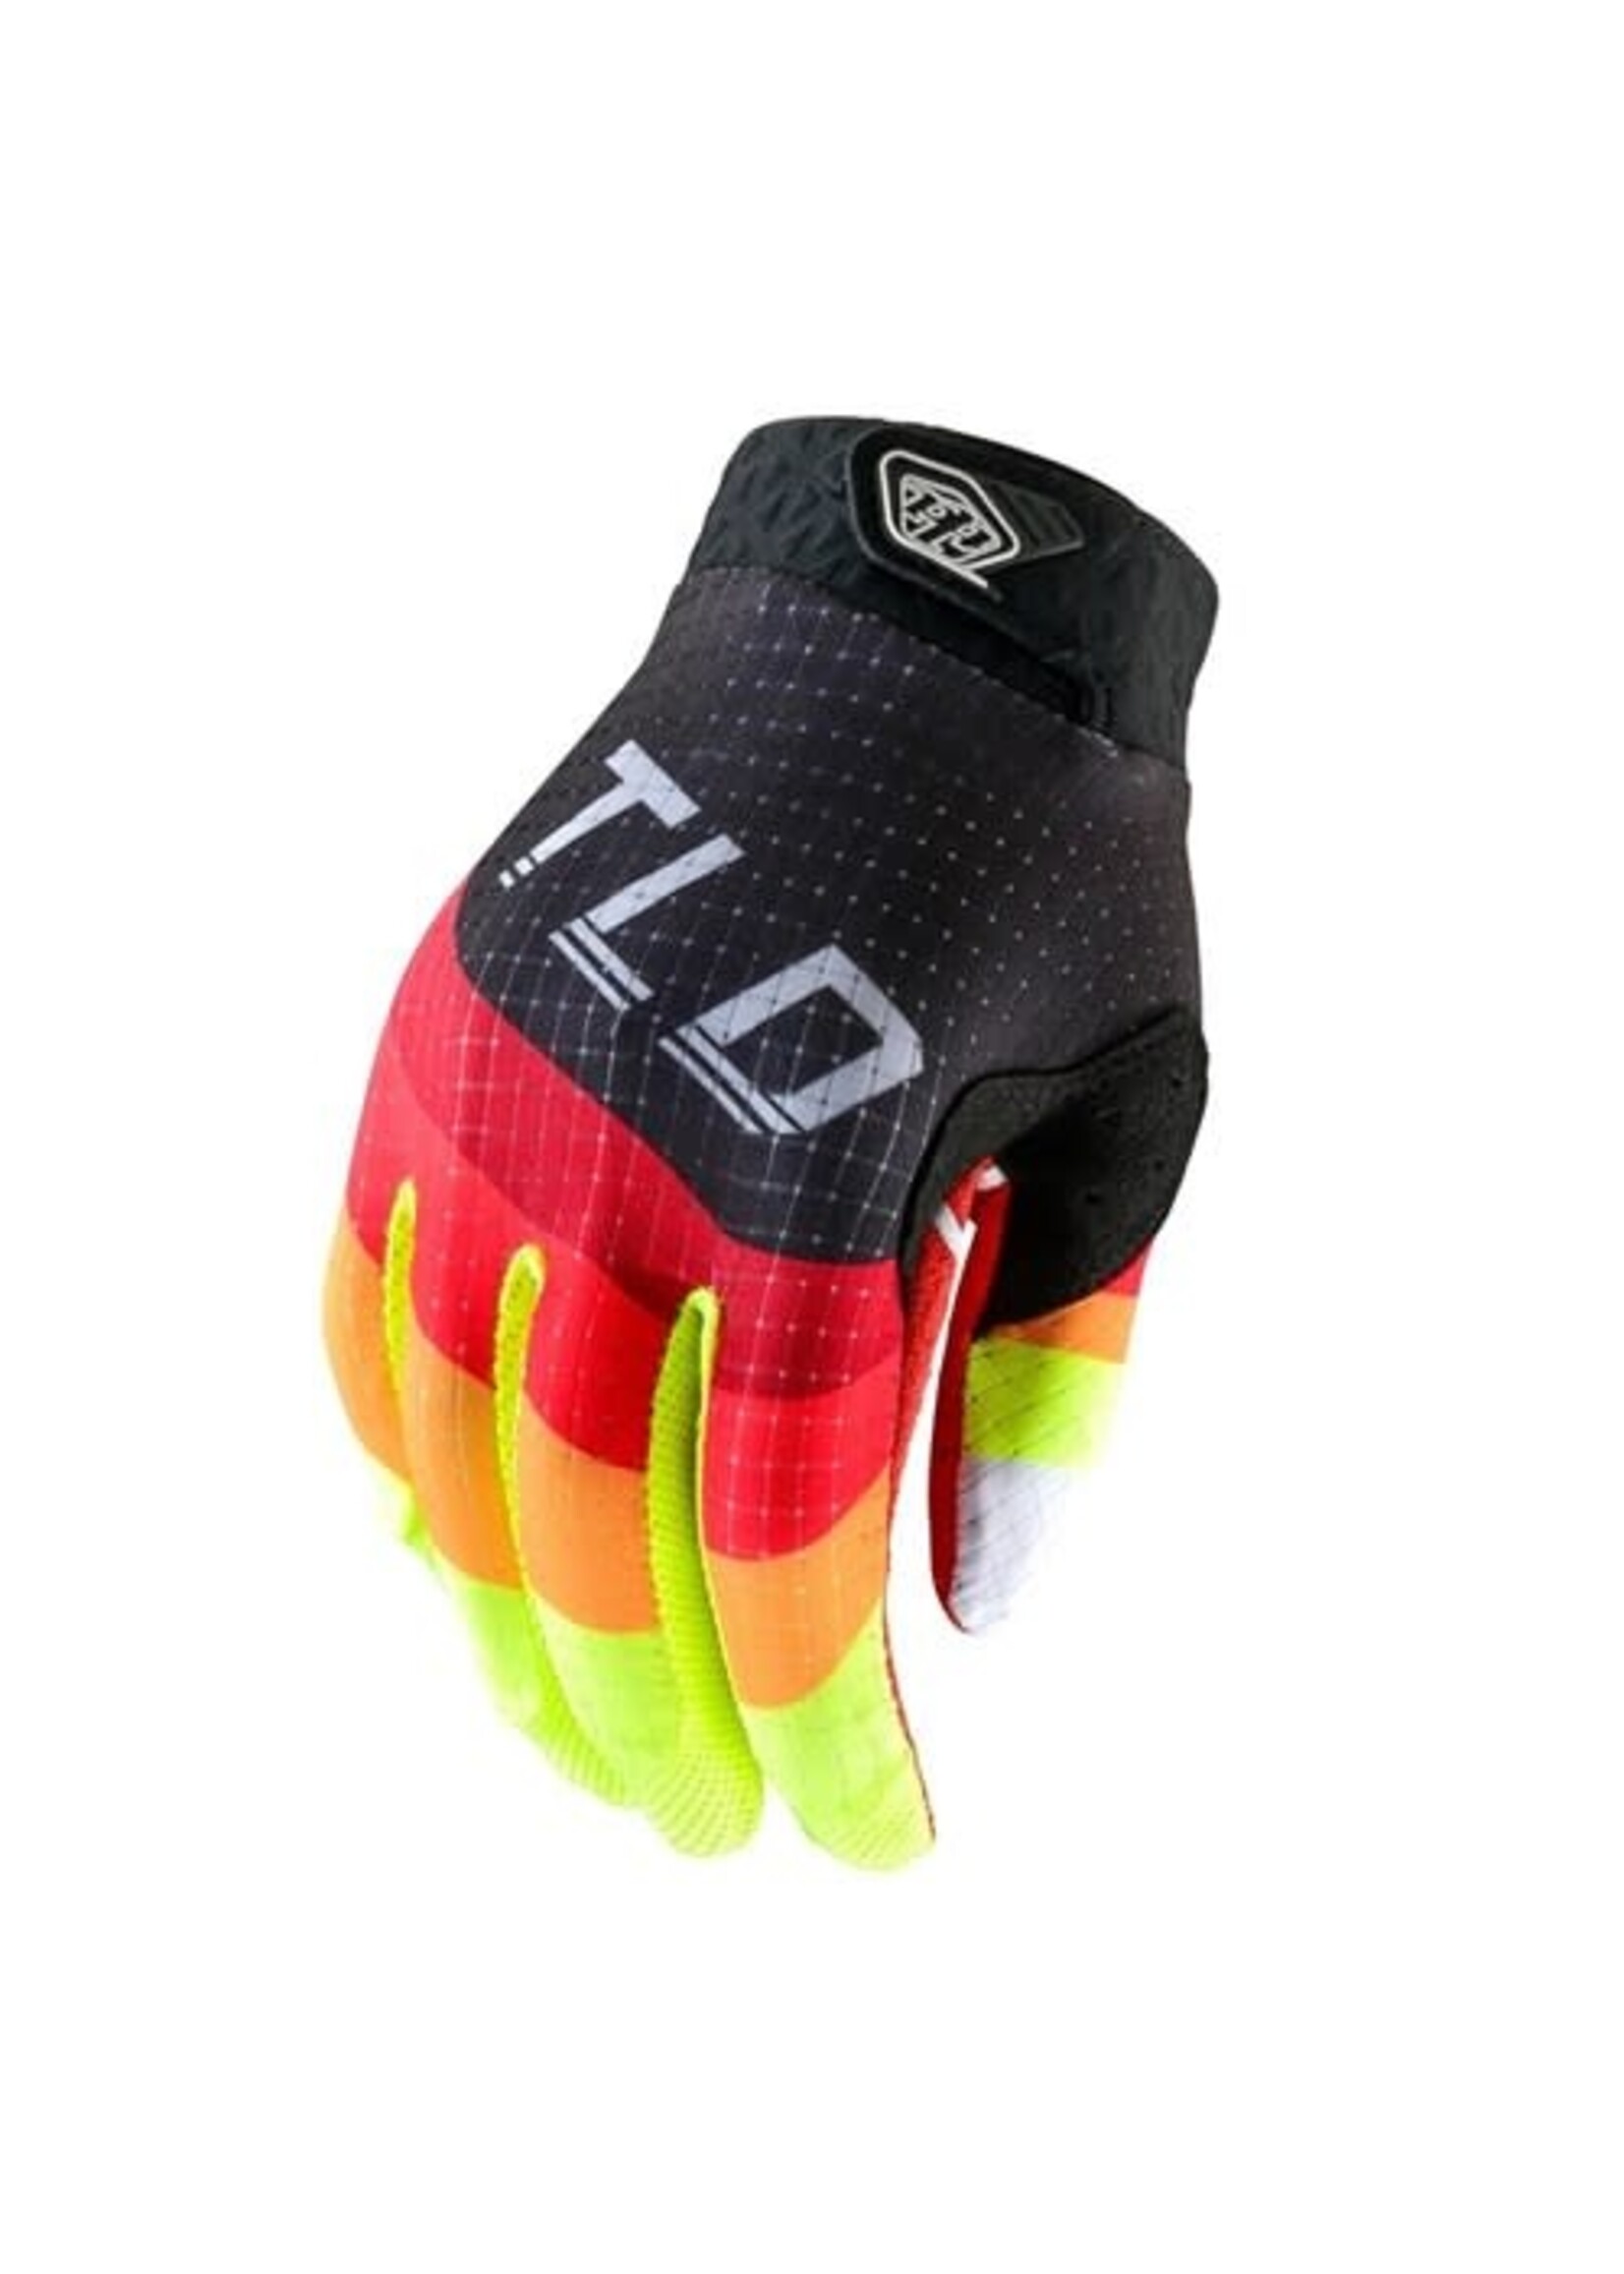 Troylee Designs Glove TLD 24.1 Air Reverb Youth